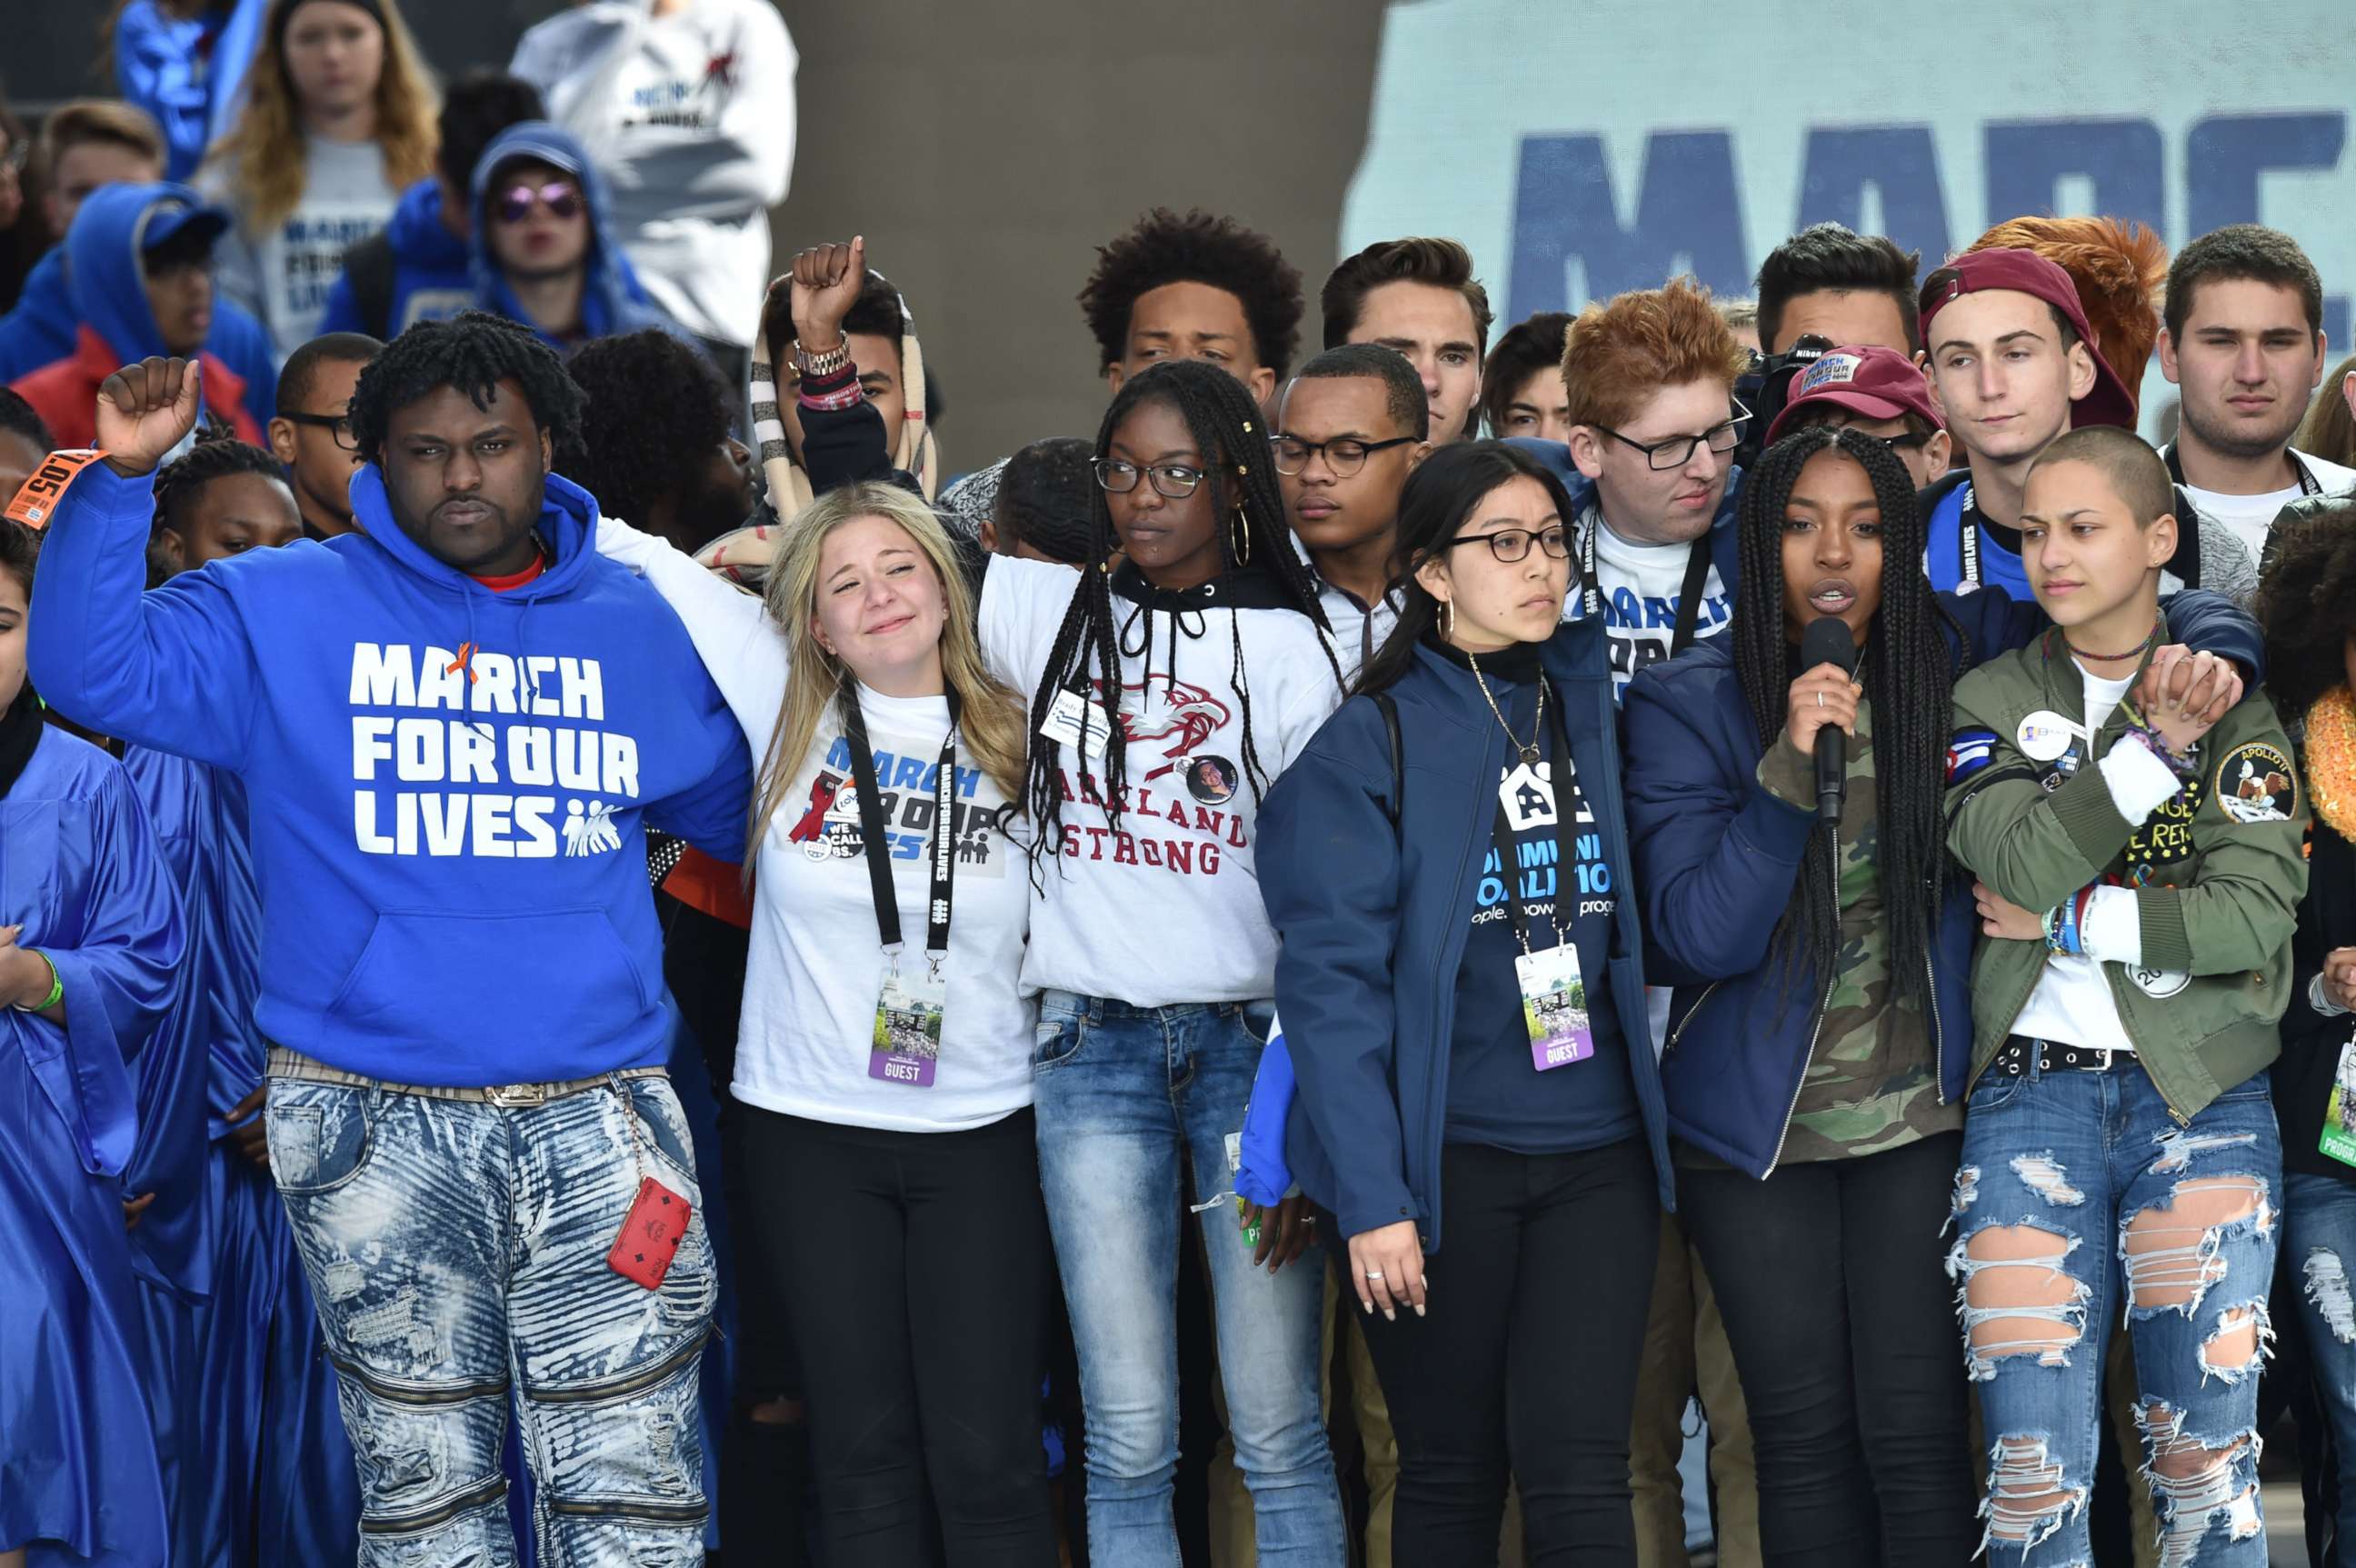 PHOTO: Marjory Stoneman Douglas High School students along with other students gather on stage during the March for Our Lives Rally in Washington, D.C., March 24, 2018.